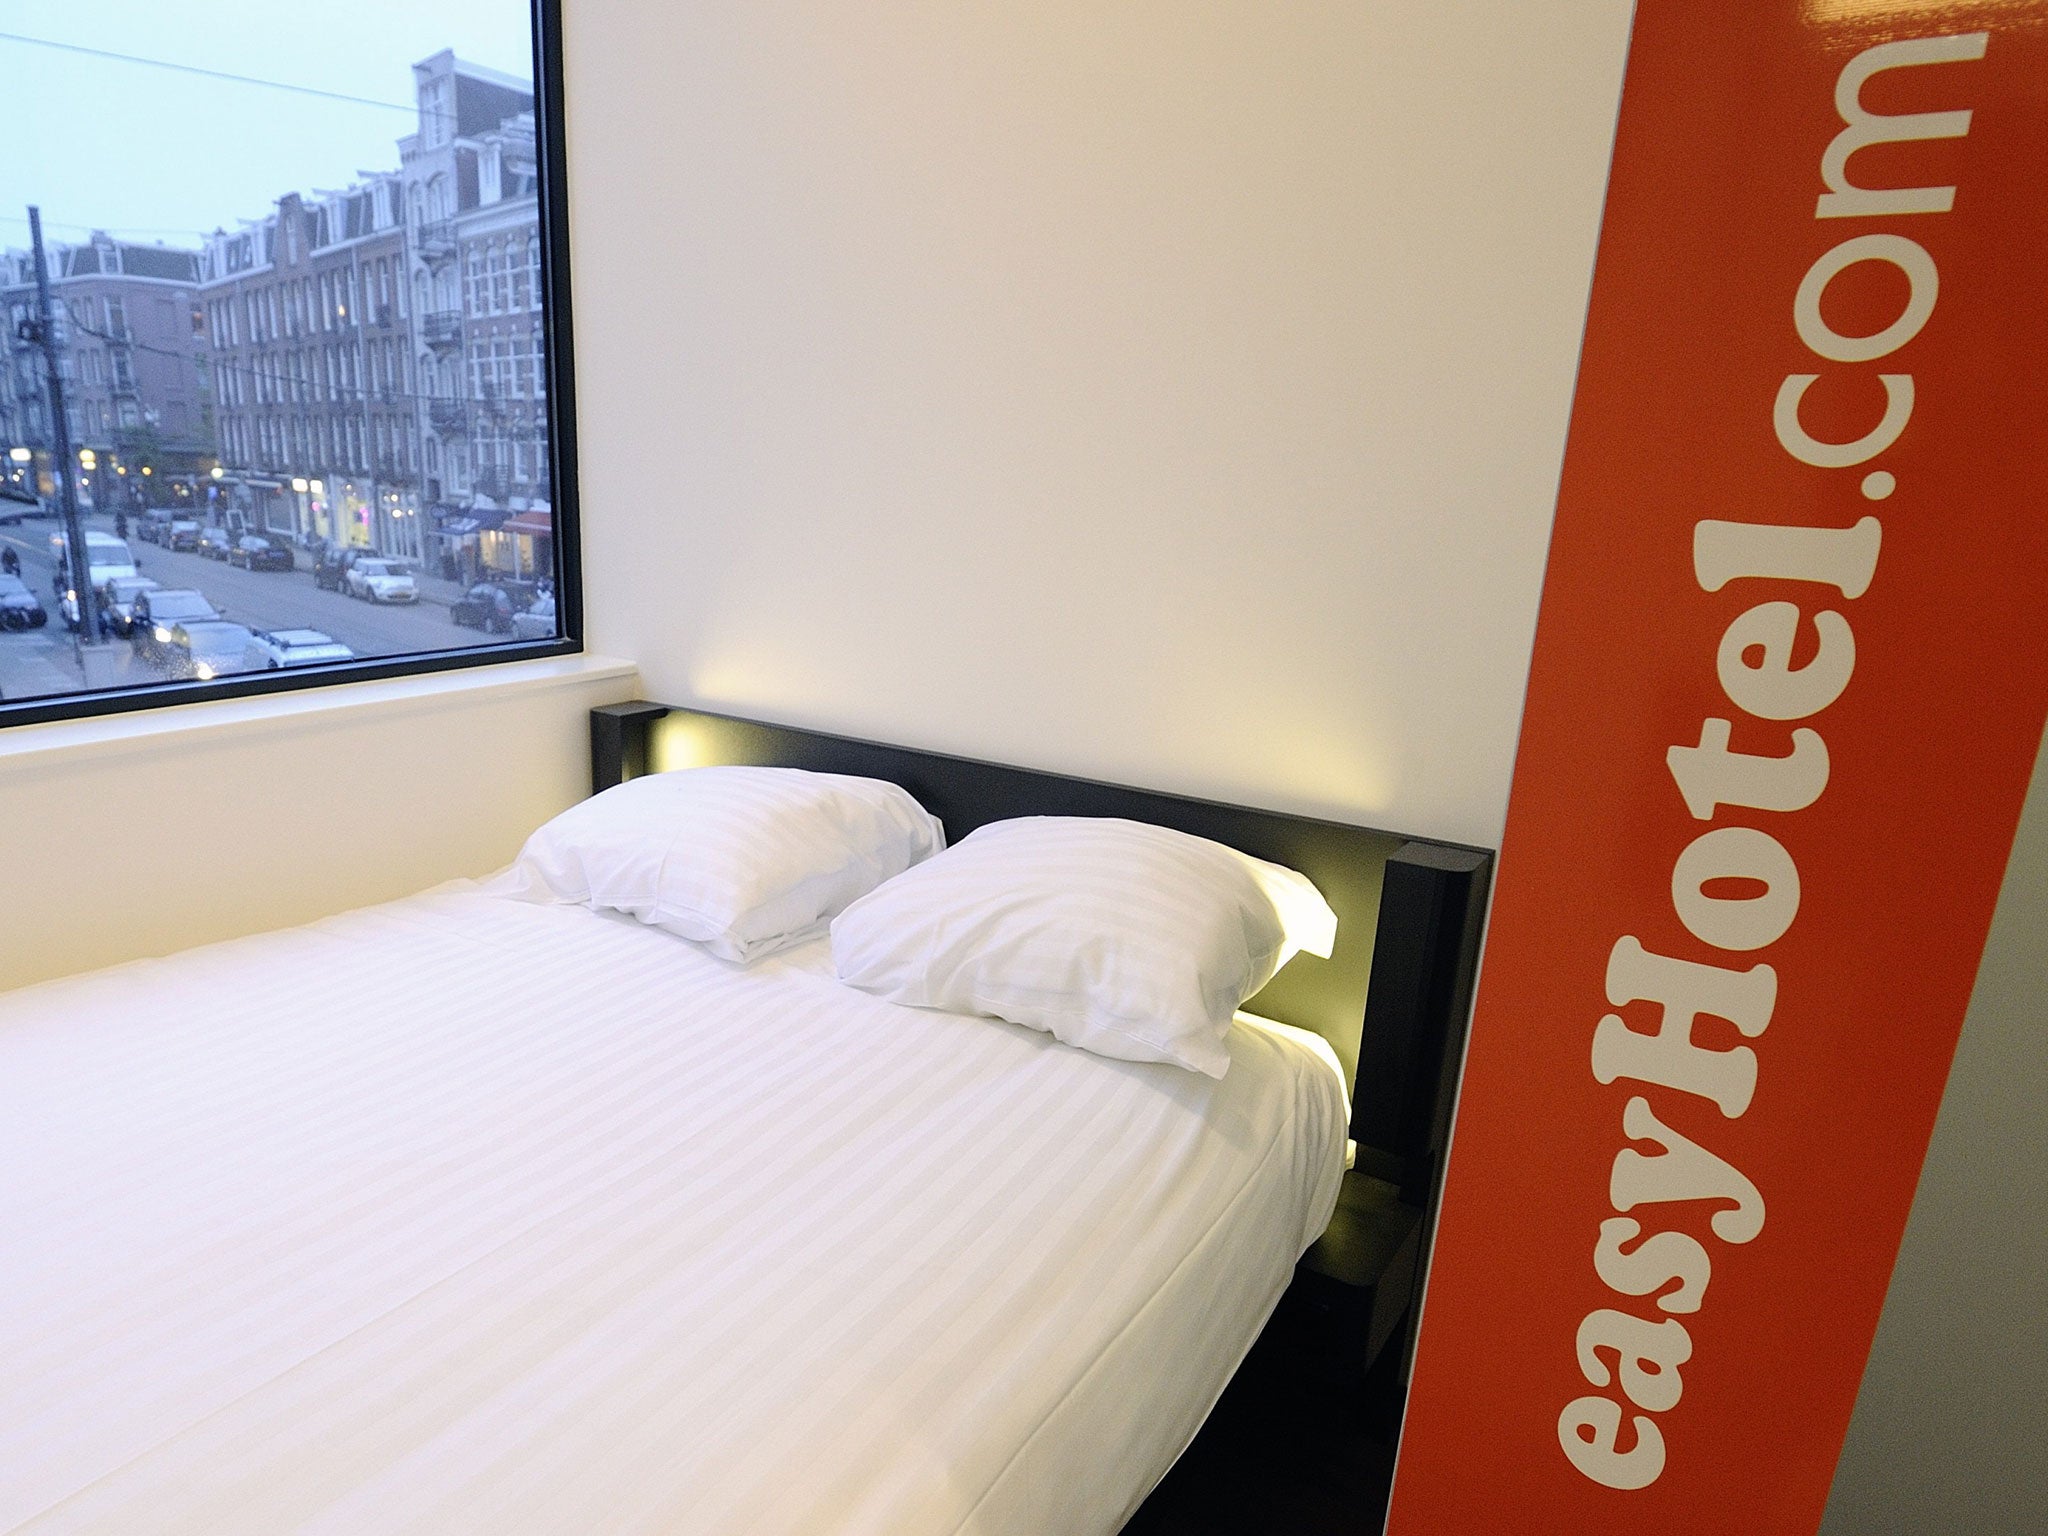 Sir Stelios Haji-Ioannou's EasyGroup holds 49 per cent of the voting shares in the EasyHotel chain